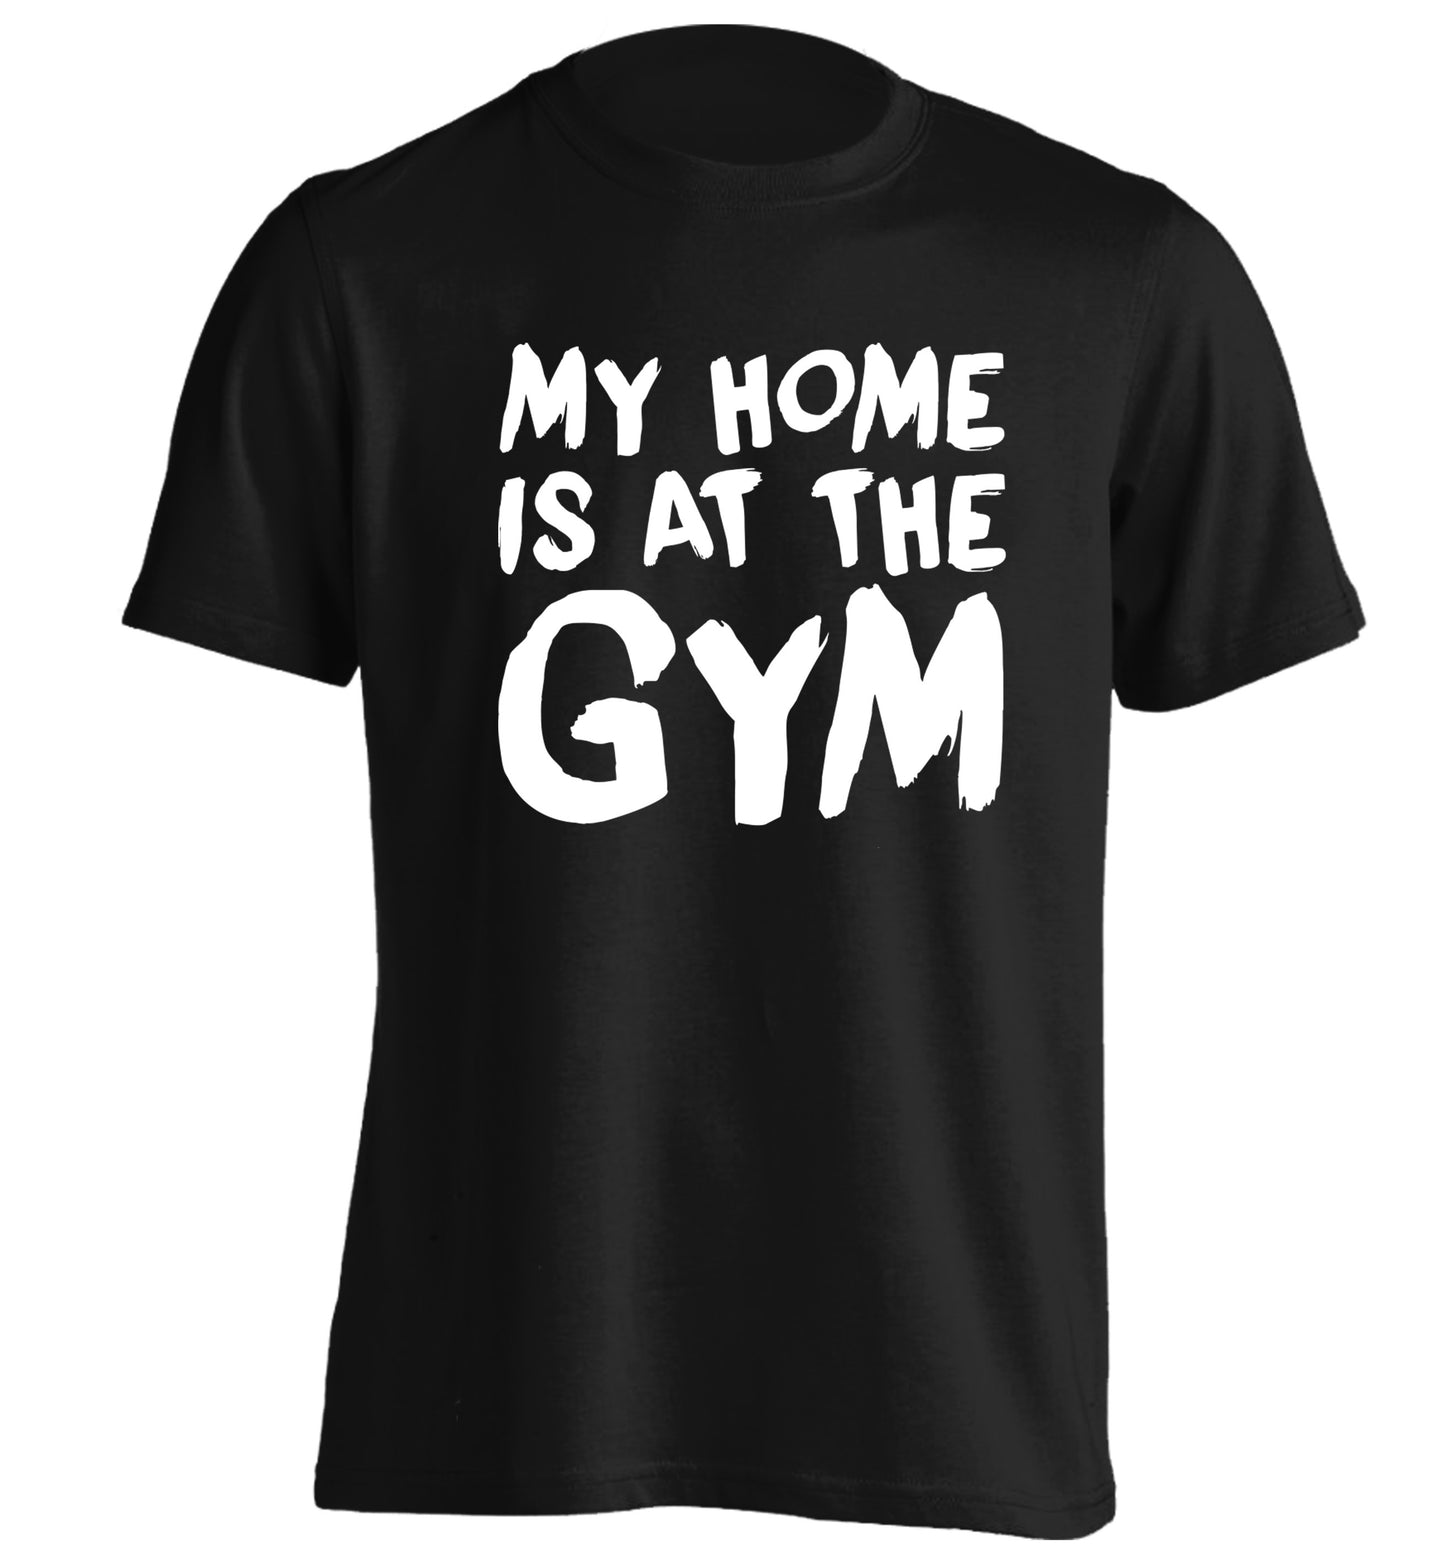 My home is at the gym adults unisex black Tshirt 2XL